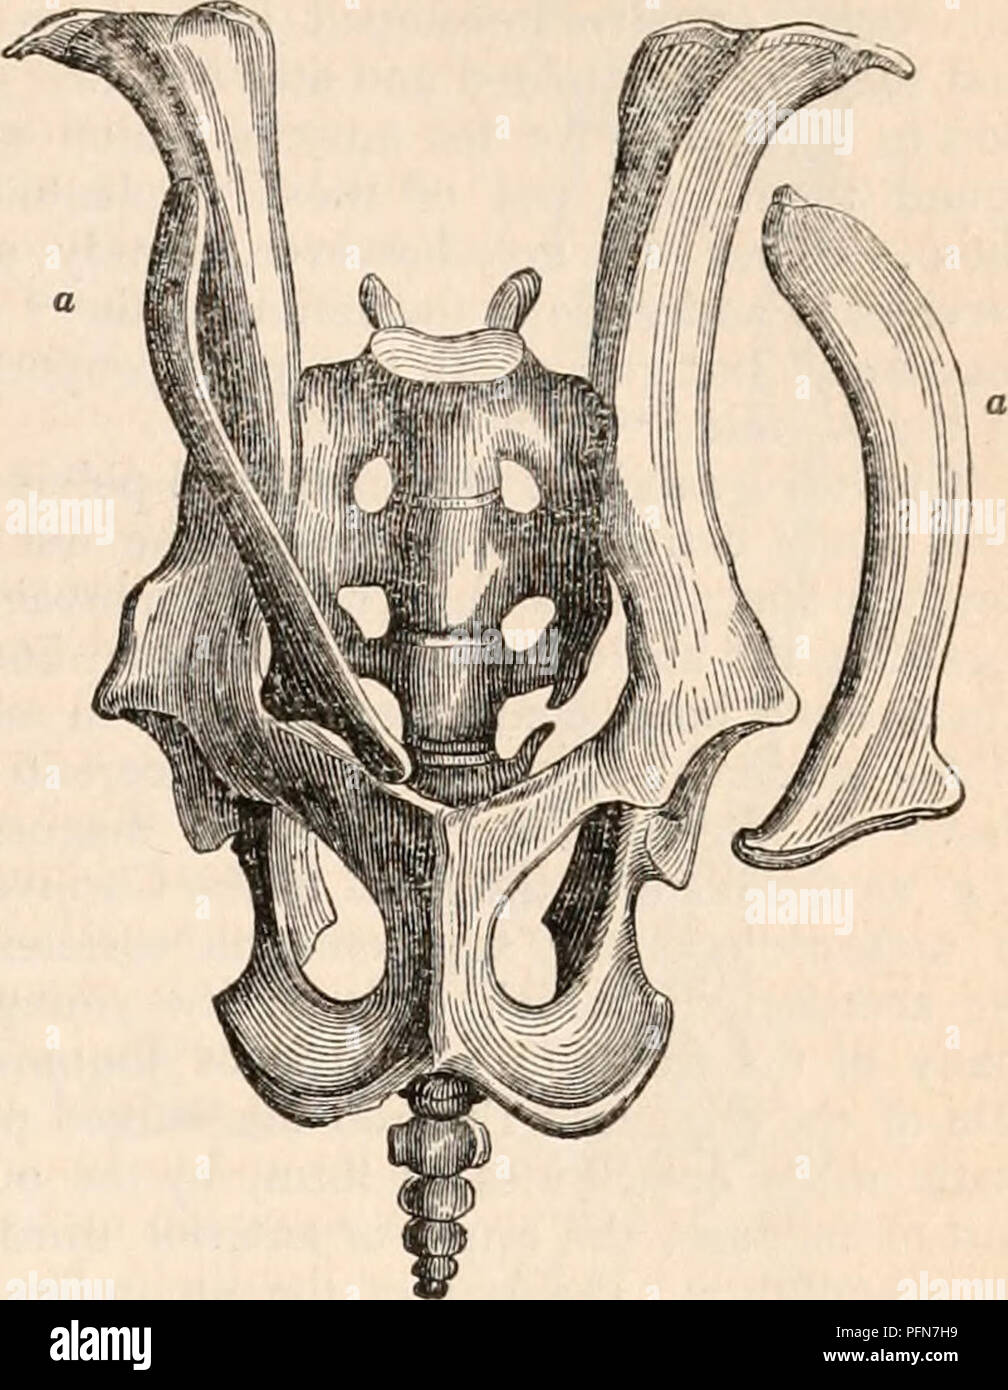 . The cyclopædia of anatomy and physiology. Anatomy; Physiology; Zoology. Right os innominatum and marsupial bone, Wombat. not only extends outwards but is curved for- wards. In the Potoroos the symphysis of the ischia, or the lower part of what is commonly called the symphysis pubis, is produced ante- riorly. The length of this symphysis, and the straight line formed by the lower margin of the ischia is a characteristic structure of the pelvis in most of the Marsupials.. Pelvis and marsupial bones i,f the Koala. elongated, flattened, and more or less curved, expanded at the proximal extremity Stock Photo